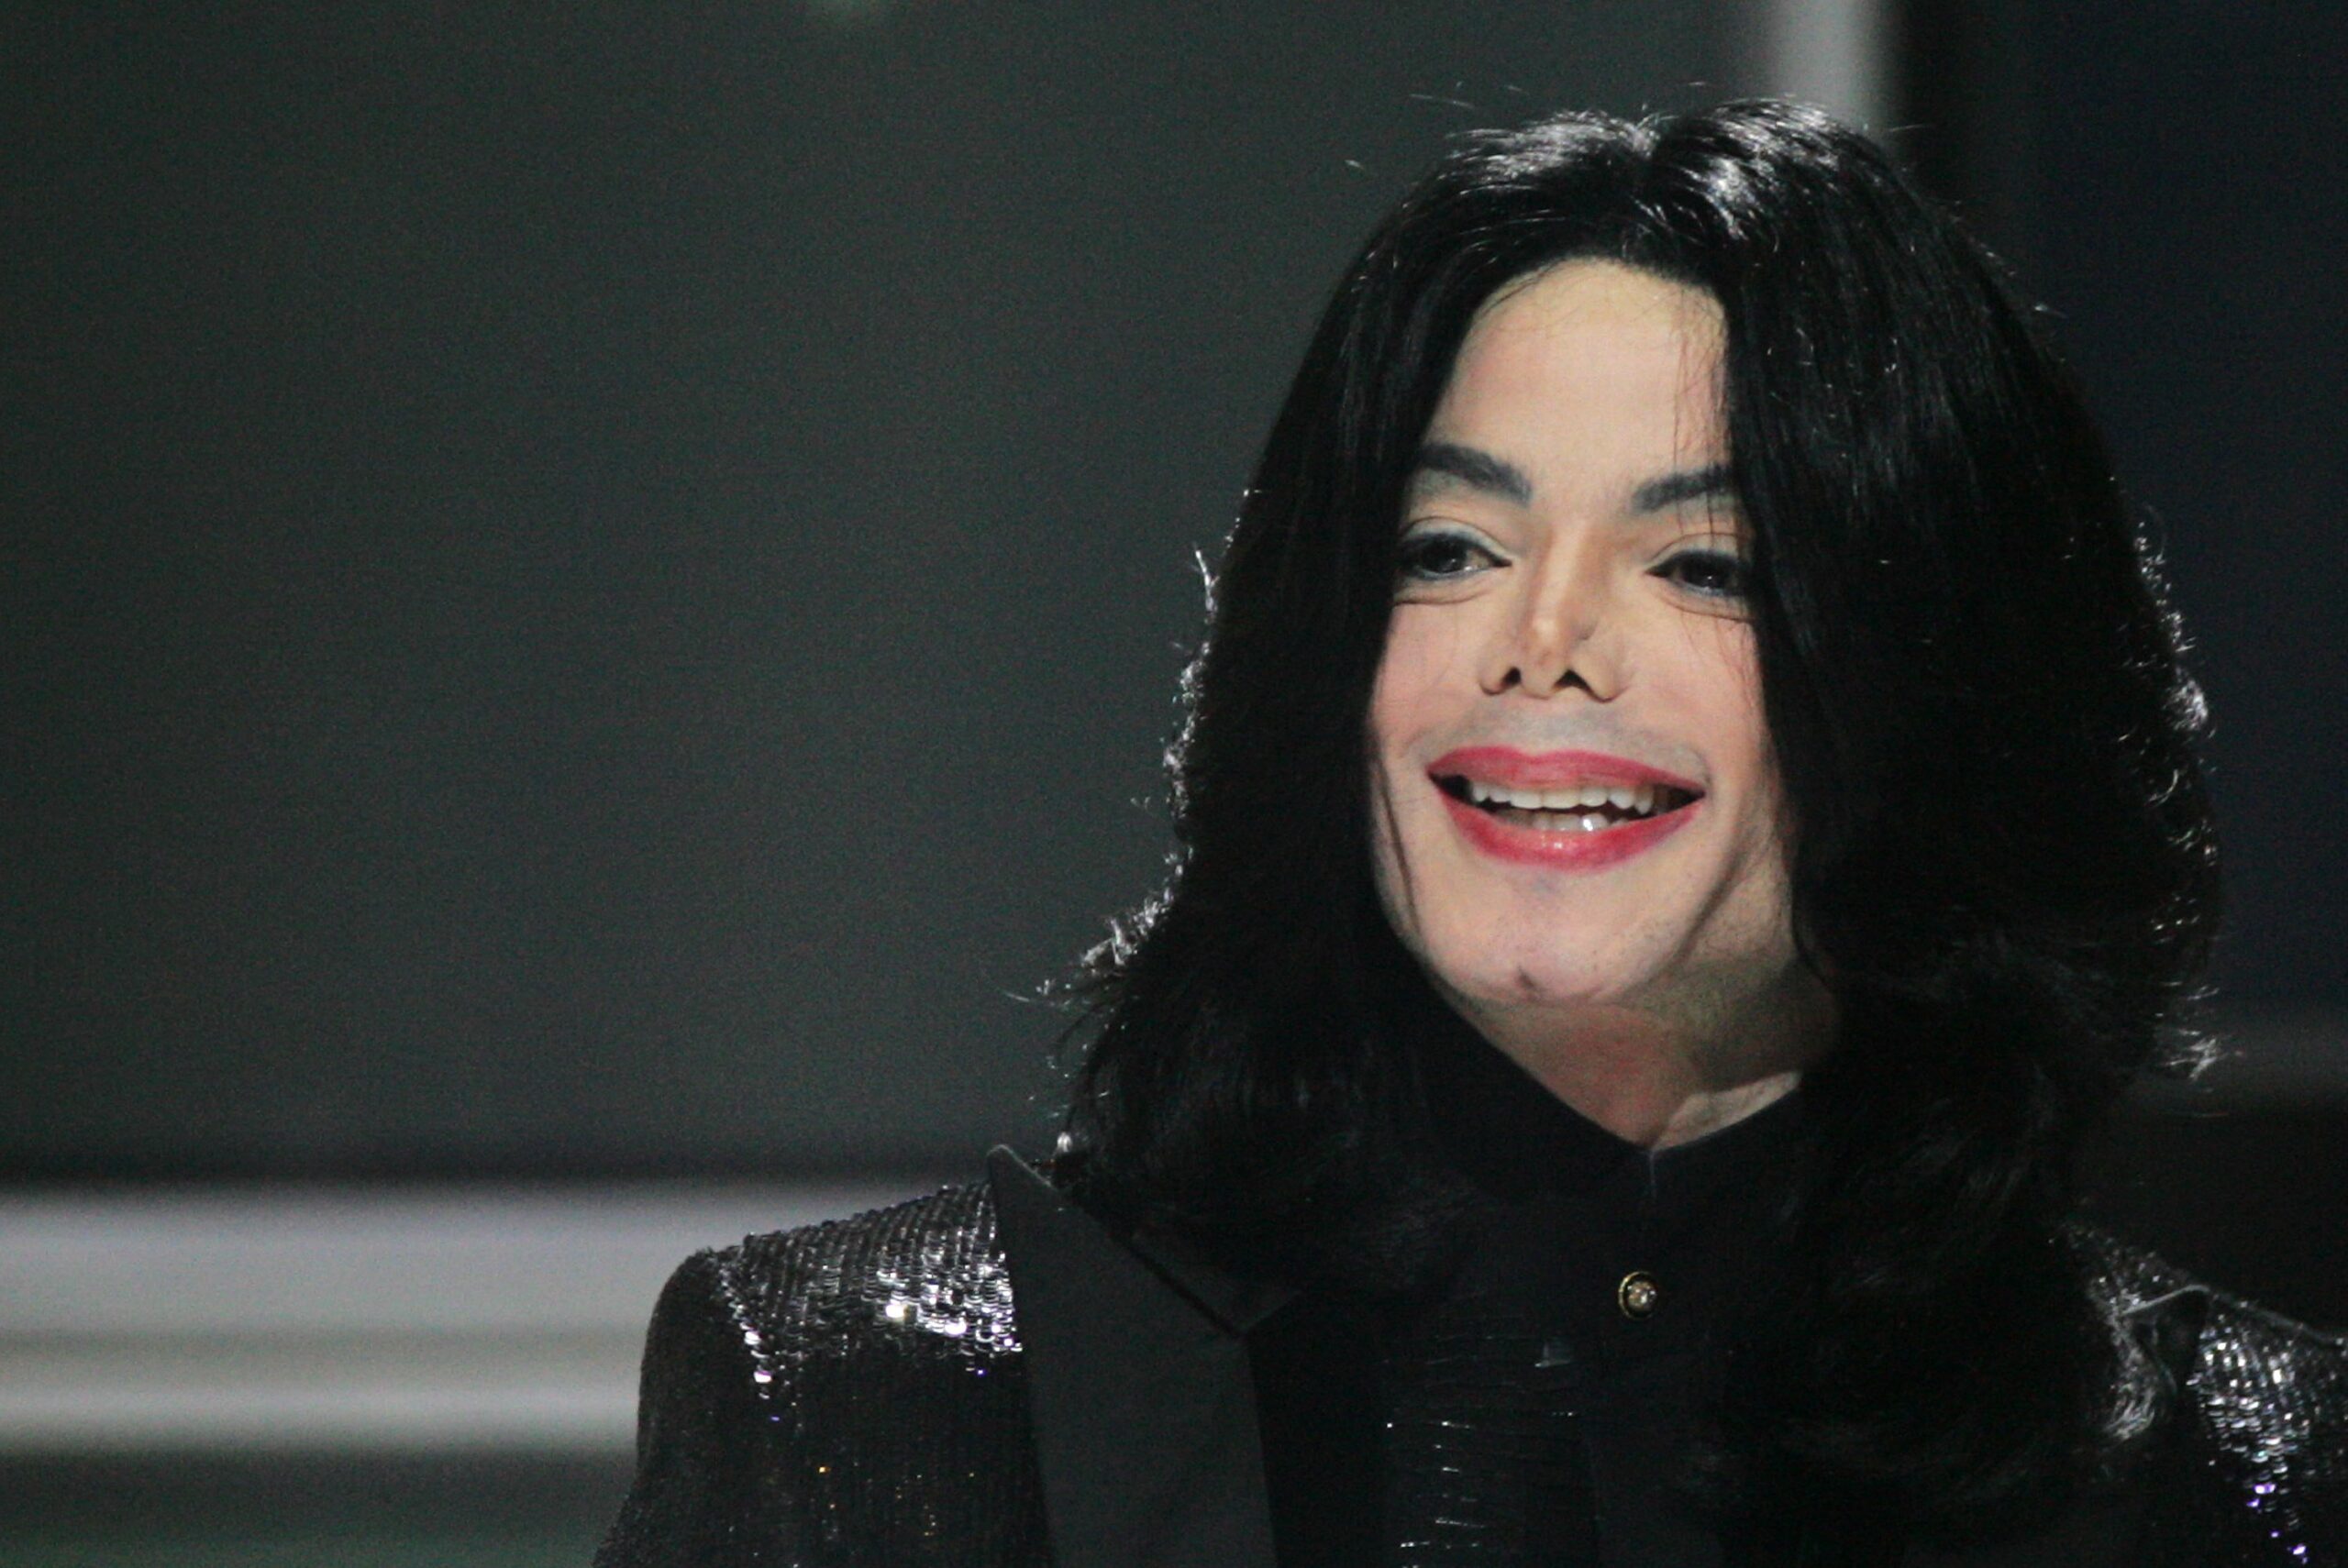 'Men in Black’ Director Explains Why Michael Jackson Declined to Appear In the Film as an Alien